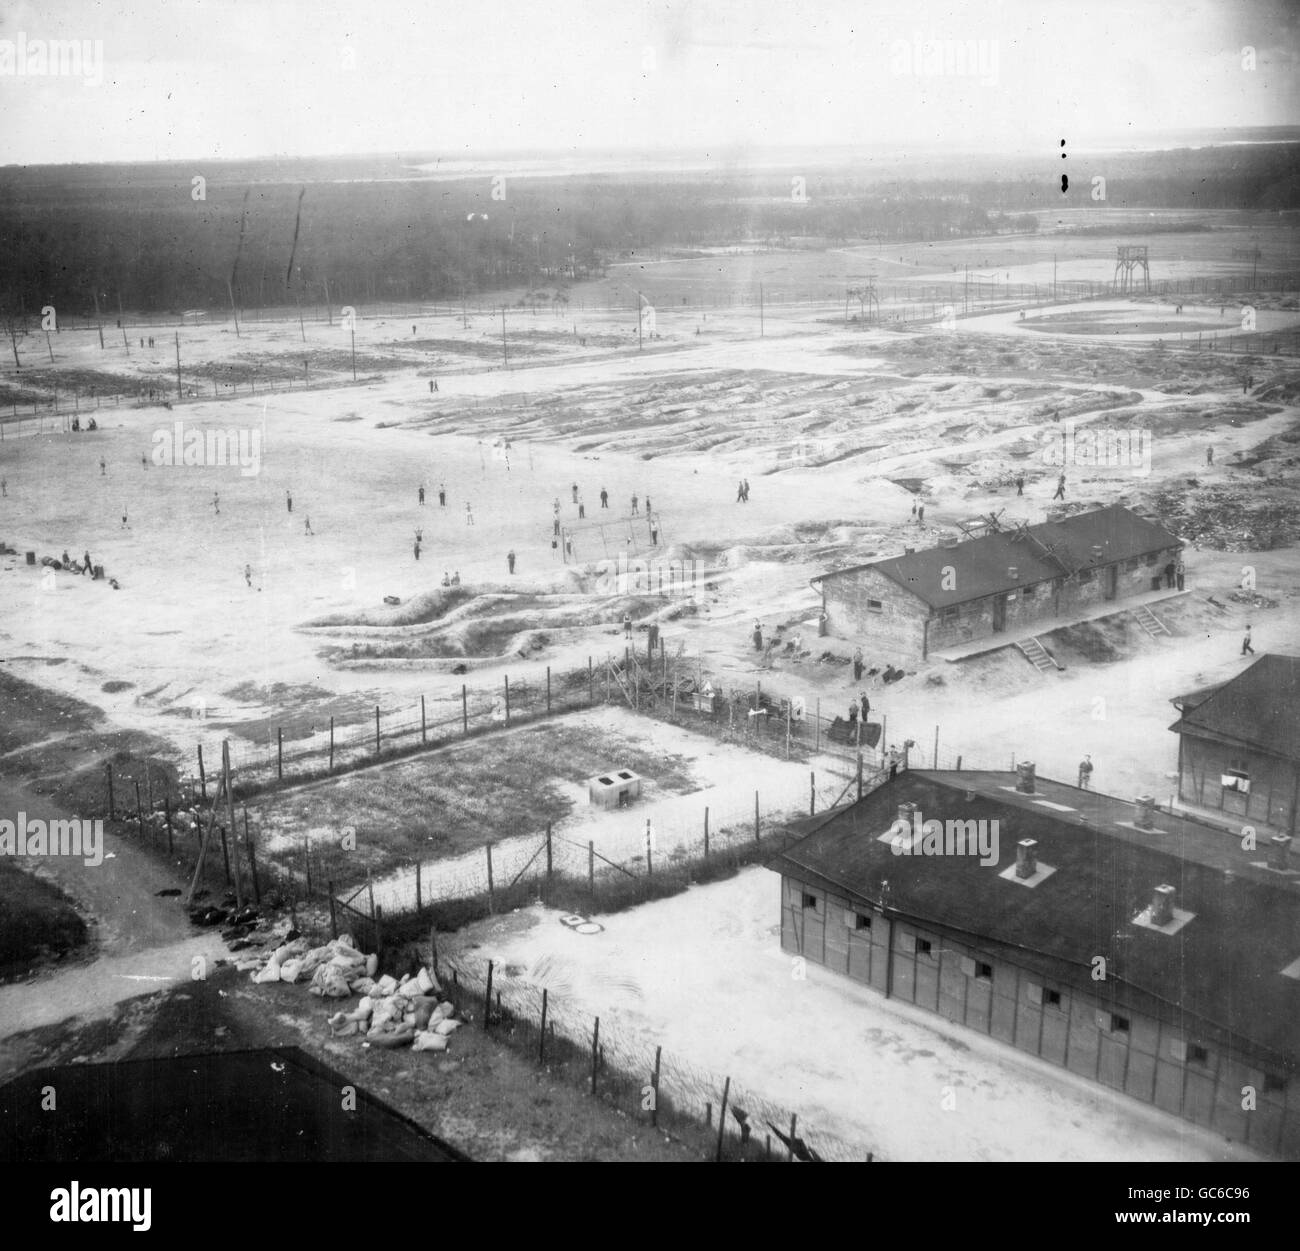 - MANDATORY CREDIT CROWN COPYRIGHT/RCAHMS A Zwangsarbeiter, slave labour camp, at Gustavsburg near Mainz, Hessen, Germany. The camp provided workers for the neighbouring heavy machinery company. The picture is from The Aerial reconnaissance Archive (TARA) whose custodian is the Royal Commission on the Ancient and Historical Monuments of Scotland (RCAHMS) and which from this Monday, be available on-line to the public. Stock Photo